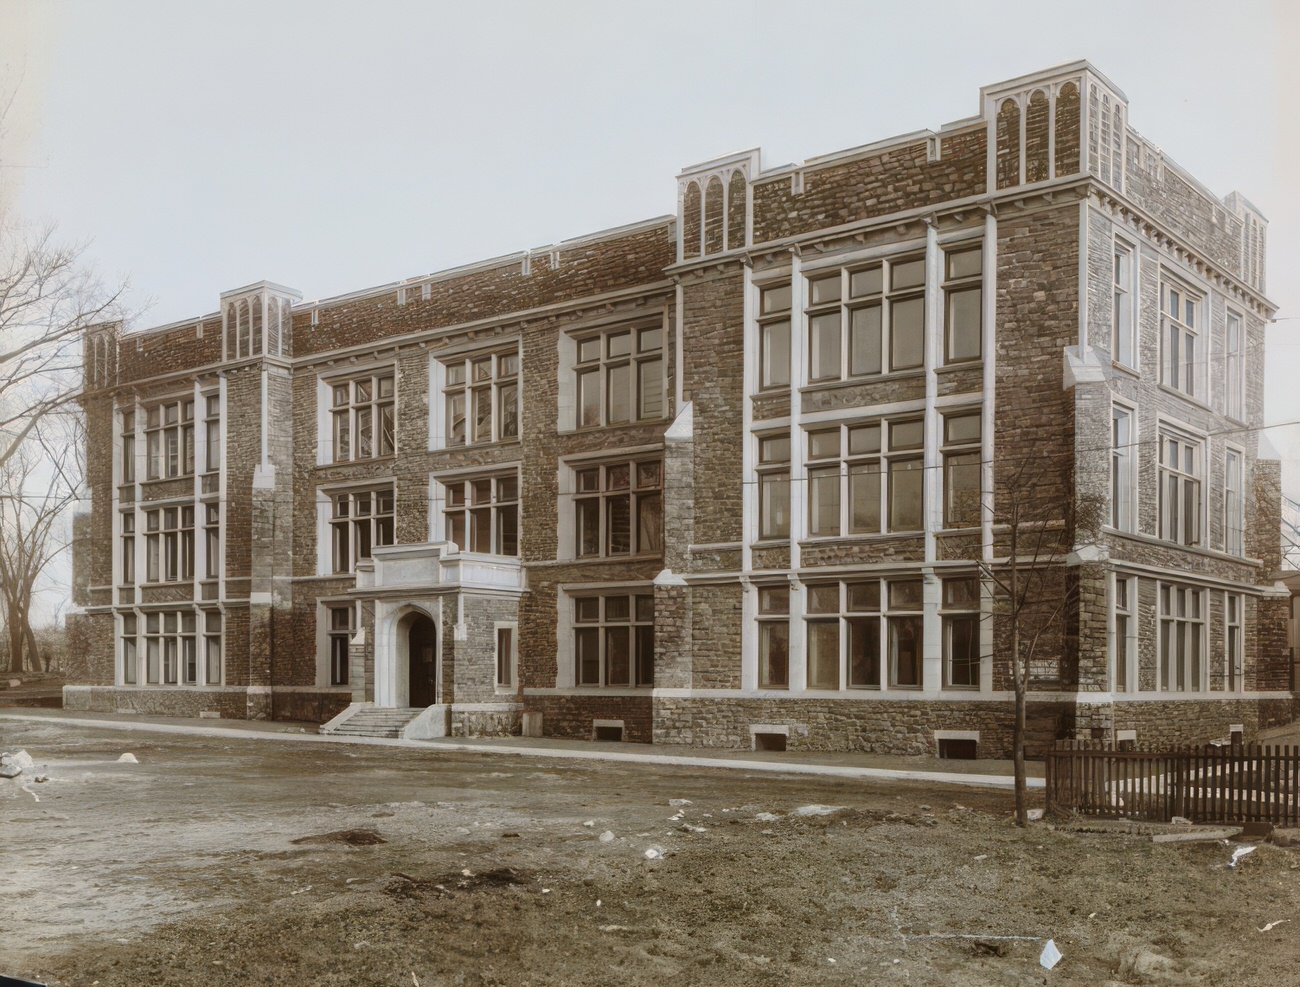 Building On Fordham Road, Possibly Part Of Fordham University, 1910.